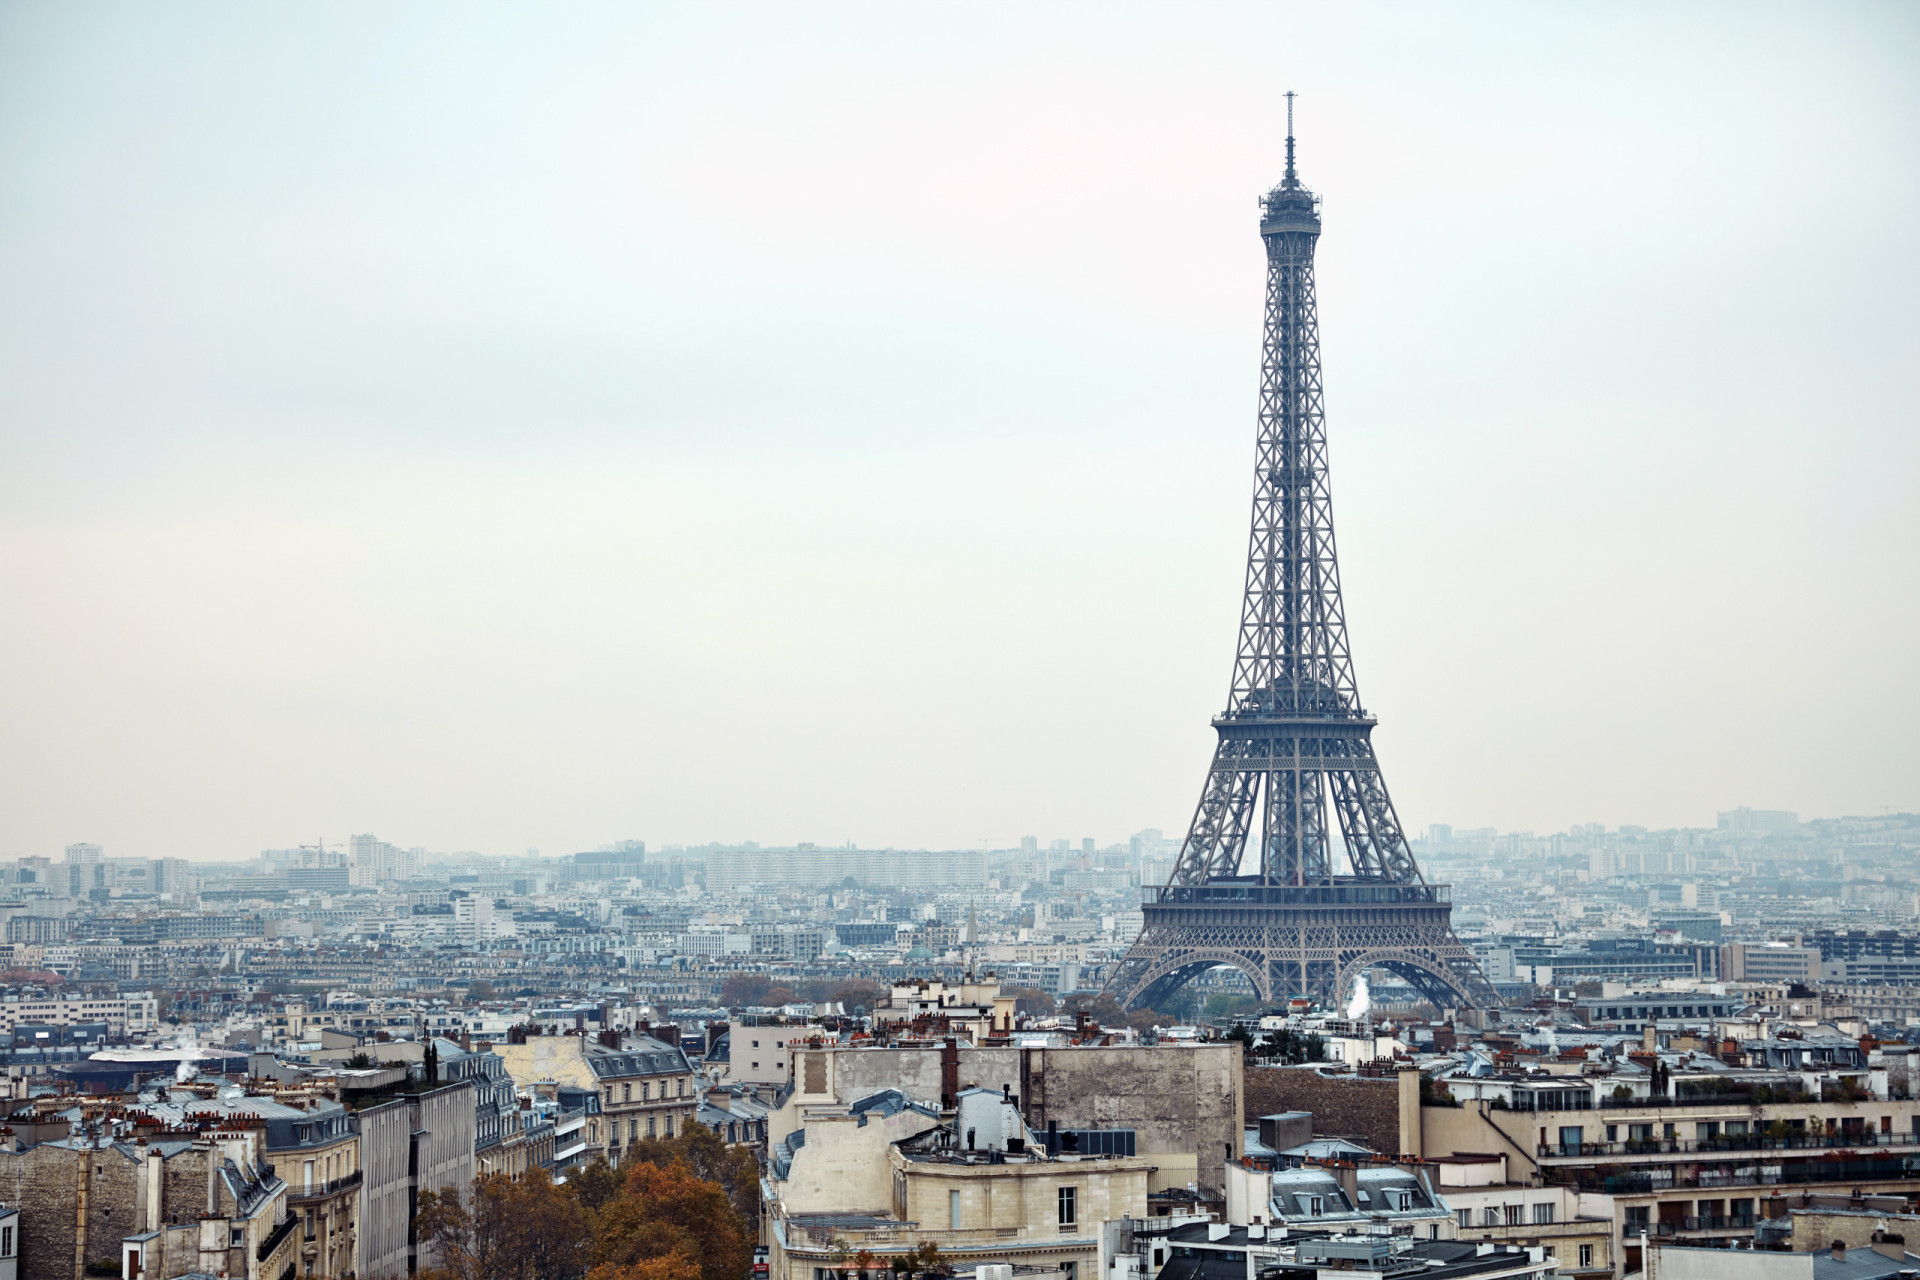 <p><span>According to research, Paris has the second-highest number of pickpocketing mentions in Europe. The Eiffel Tower is the most risky attraction for tourist theft.</span></p><p><a href="https://www.msn.com/en-us/community/channel/vid-7xx8mnucu55yw63we9va2gwr7uihbxwc68fxqp25x6tg4ftibpra?cvid=94631541bc0f4f89bfd59158d696ad7e">Follow us and access great exclusive content every day</a></p>